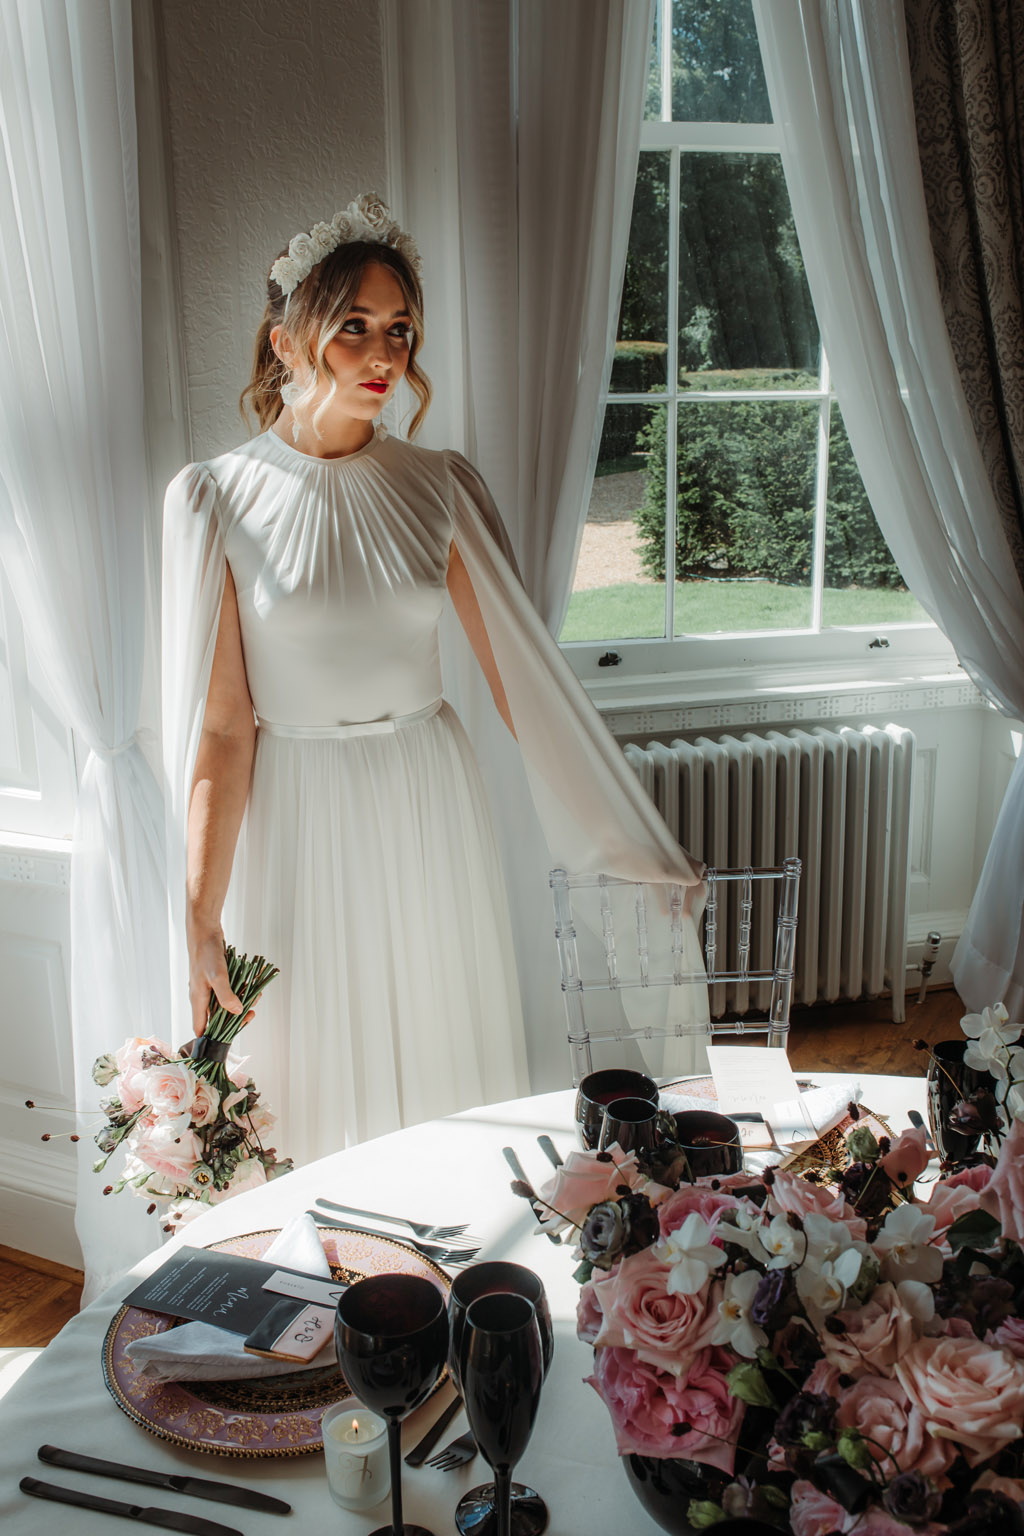 Contemporary Black & Pink wedding styling ideas at Bawtry Hall, image credit Esther Louise Triffitt Photography (18)